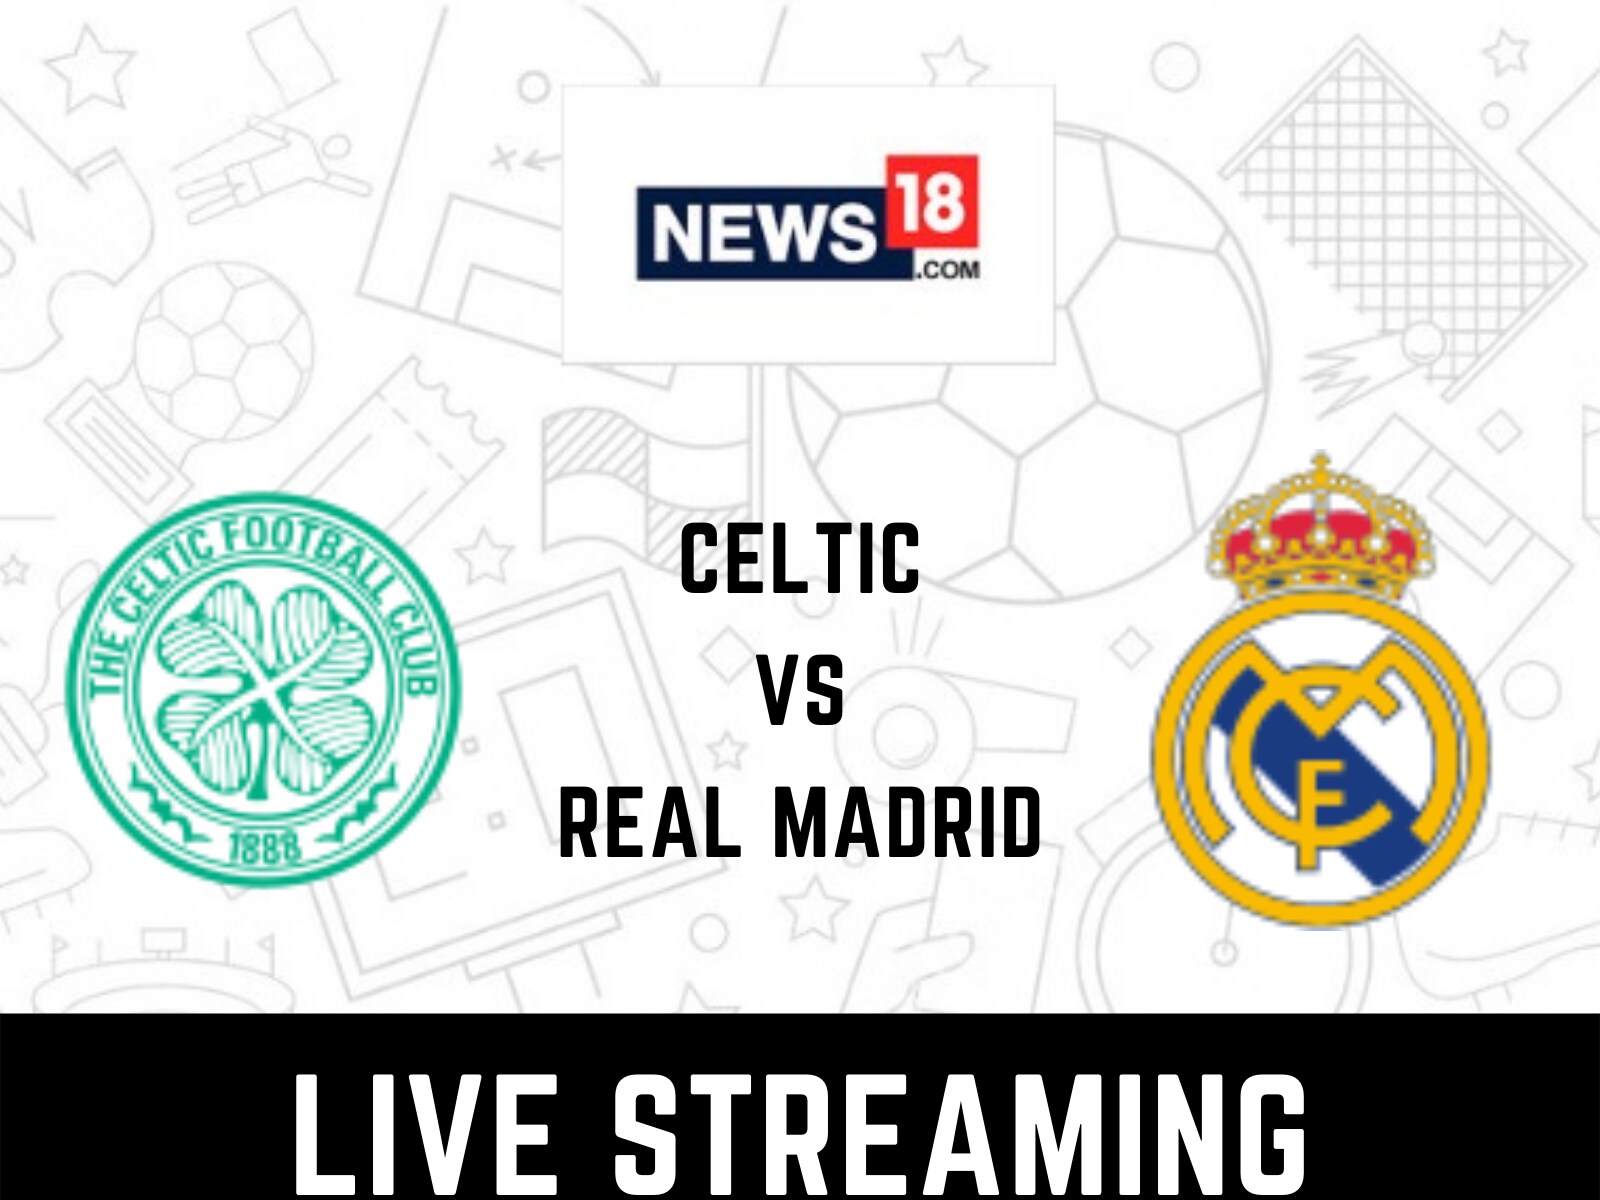 Celtic vs Real Madrid Live Streaming When and Where to Watch Celtic vs Real Madrid UEFA Champions League Live Coverage on Live TV Online